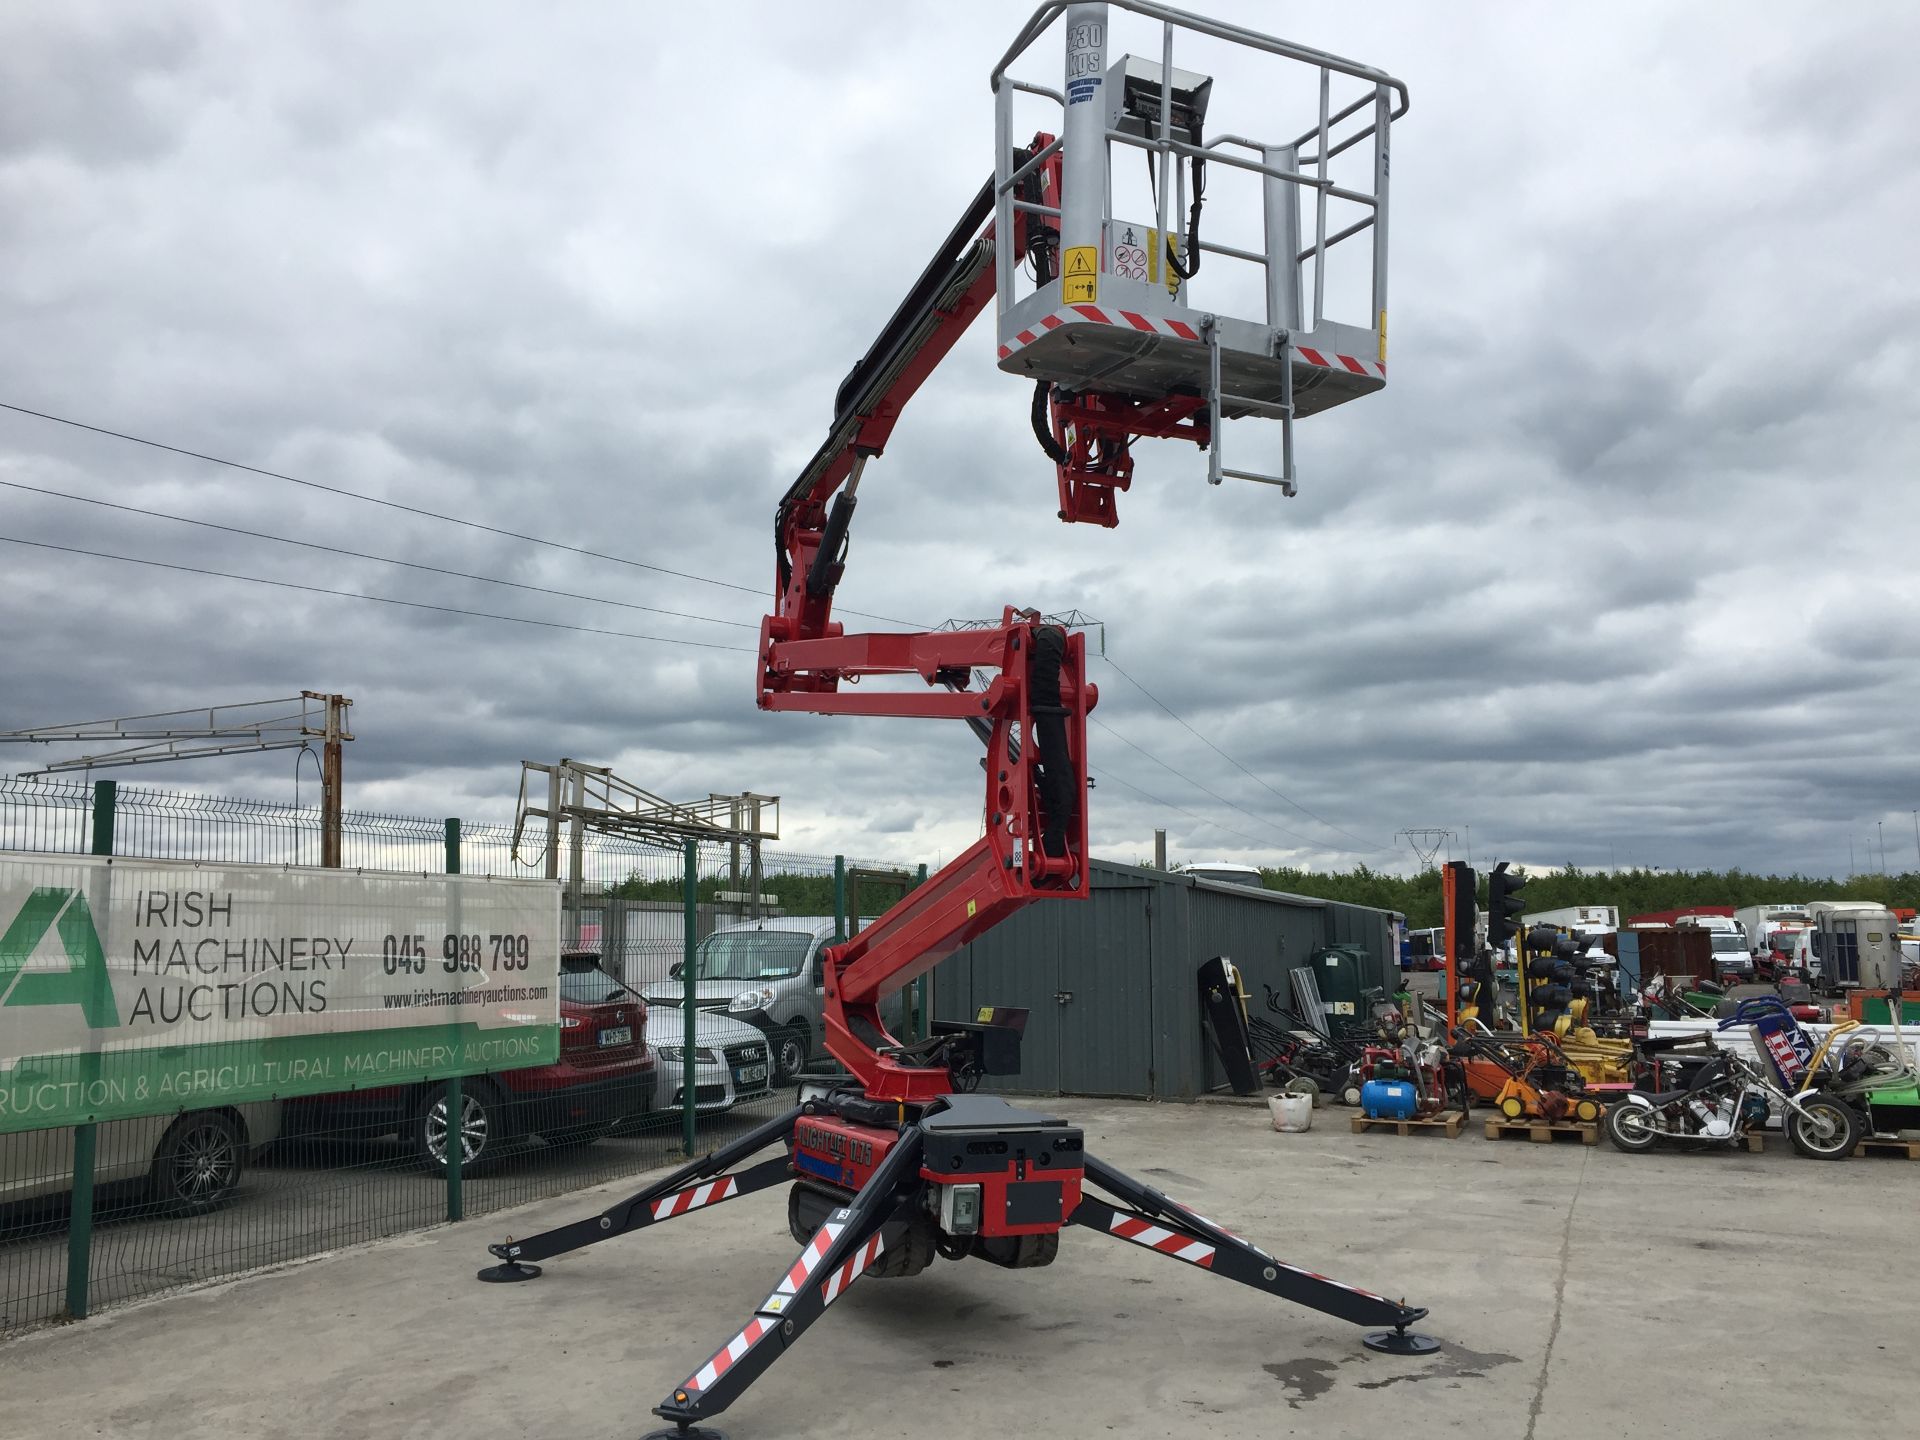 PL-14631 2012 Hinowa Lightlift 17.75 Performance Tracked Articulated Spider Boom Lift - Image 12 of 26